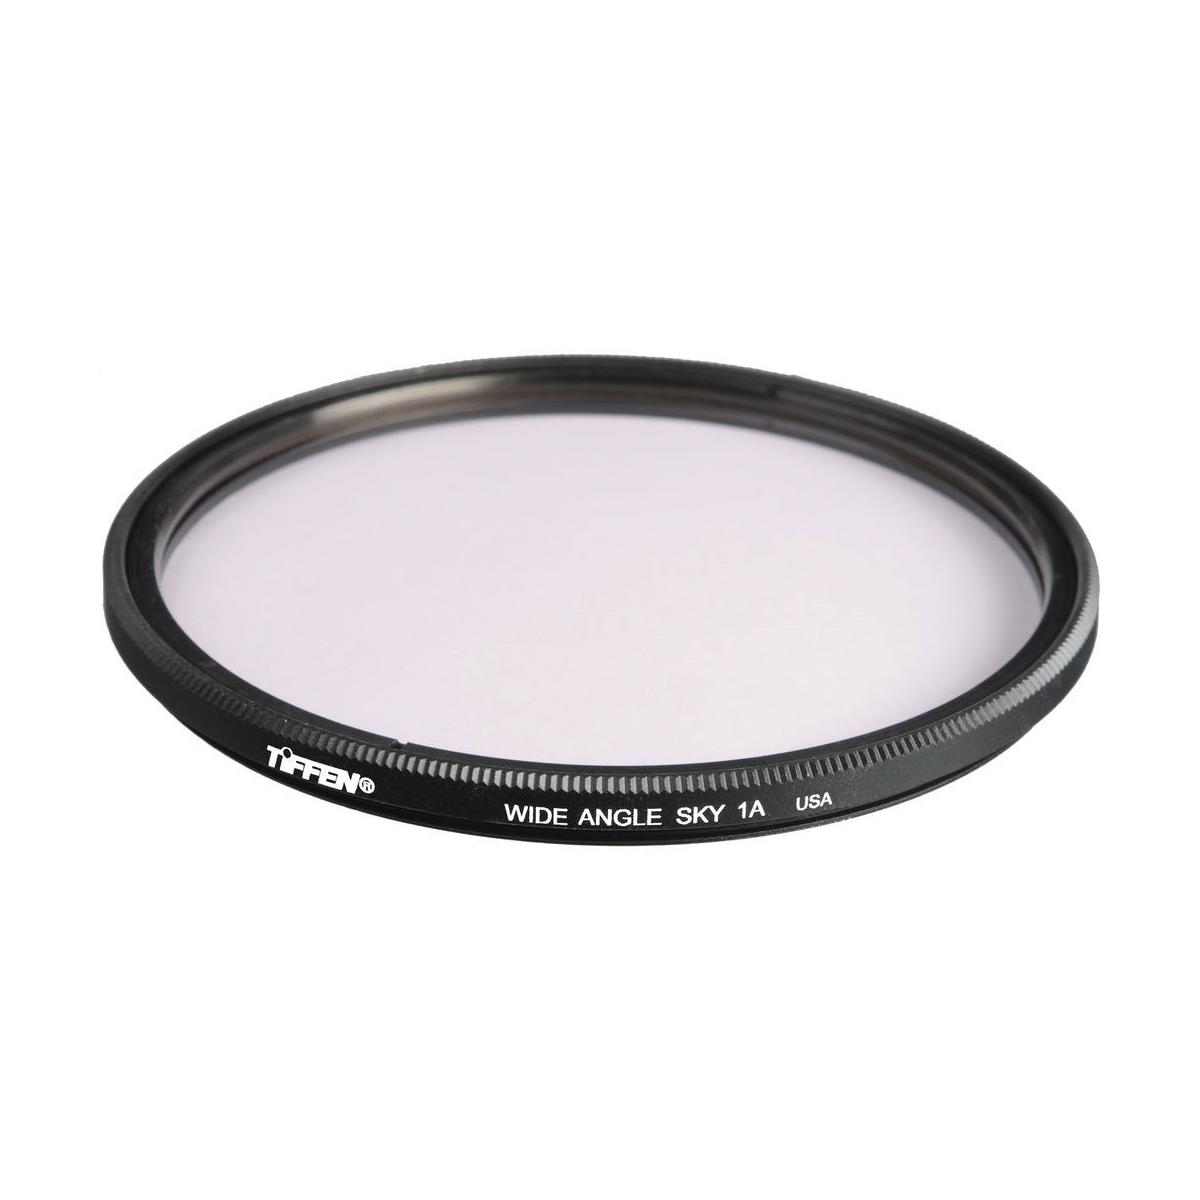 Tiffen 72mm Skylight Wide Angle Thin Filter wide angle macro lens hood wide angle standard 52mm 0 45 x black super wide angle for canon nikon d3200 d3100 d5200 d5100